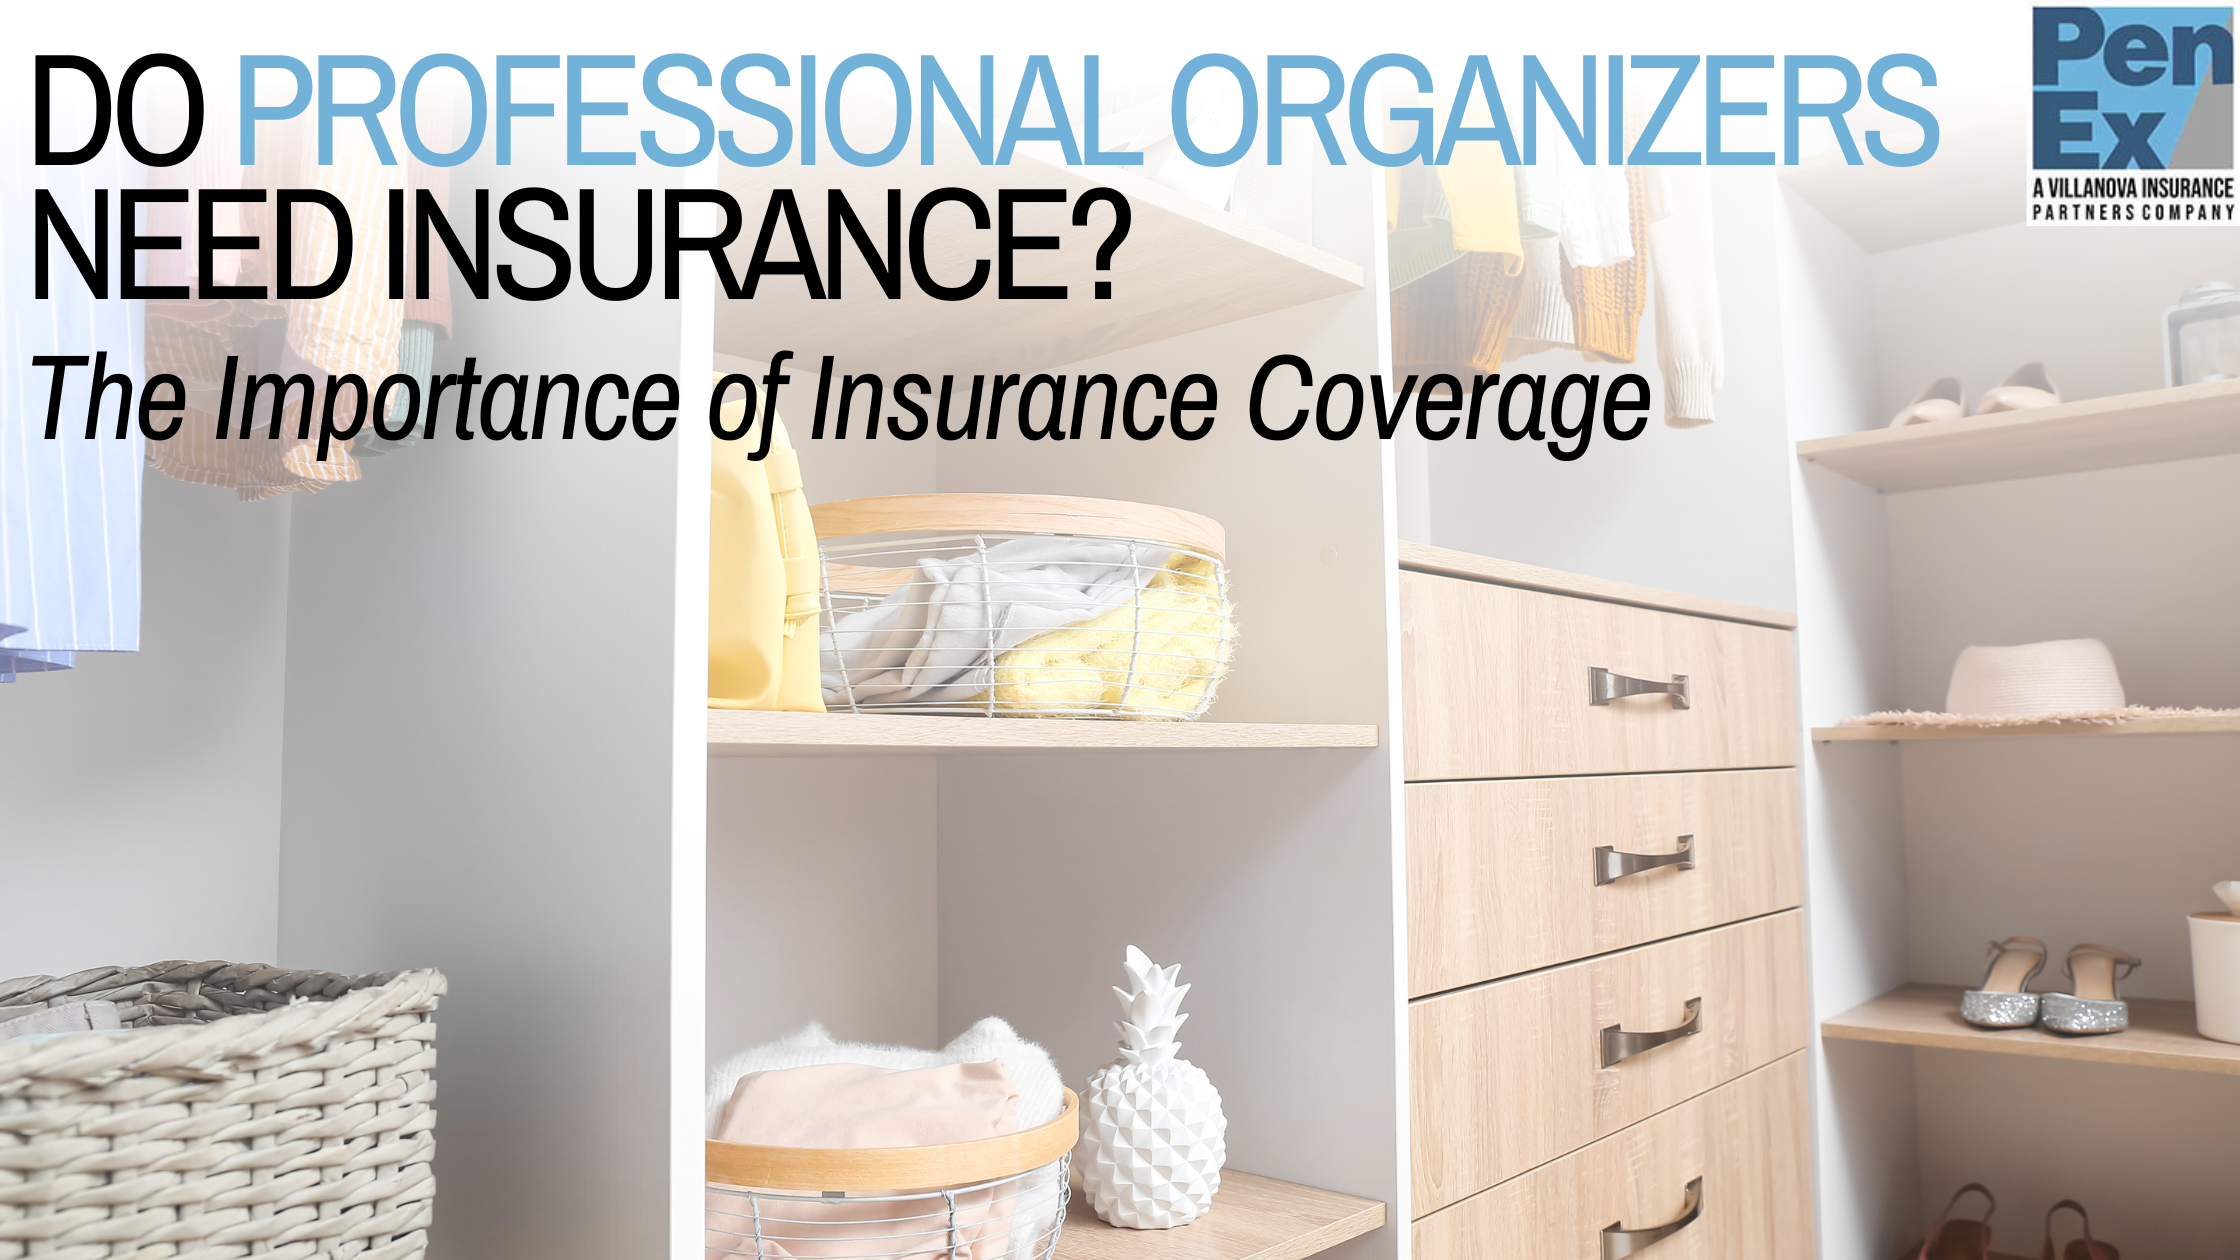 The Importance of Insurance Coverage